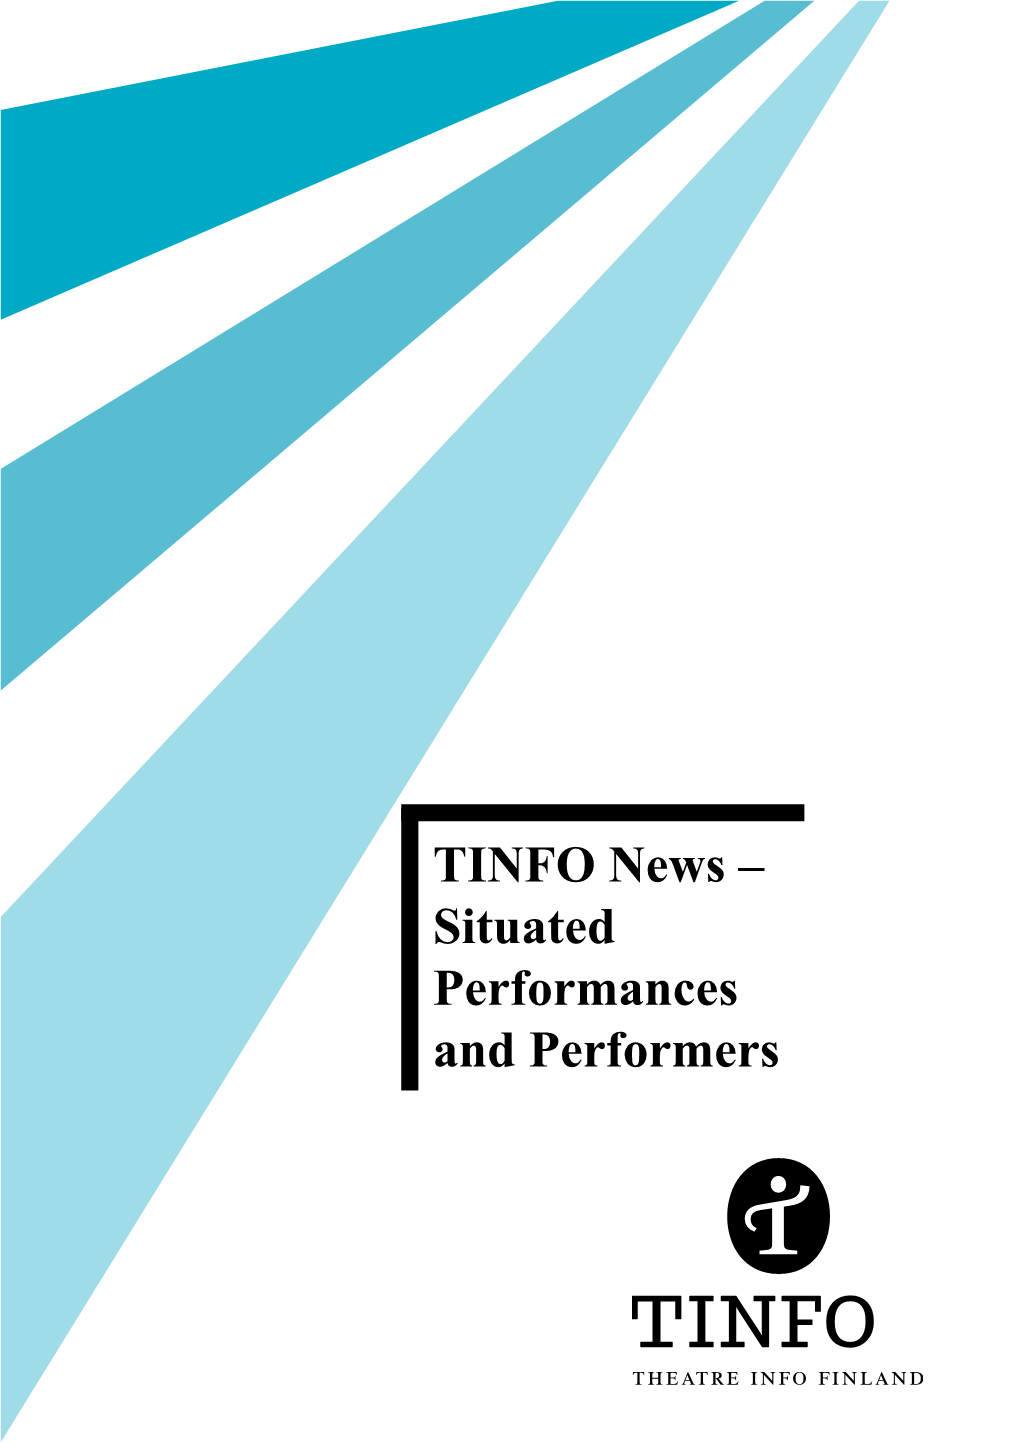 TINFO News – Situated Performances and Performers